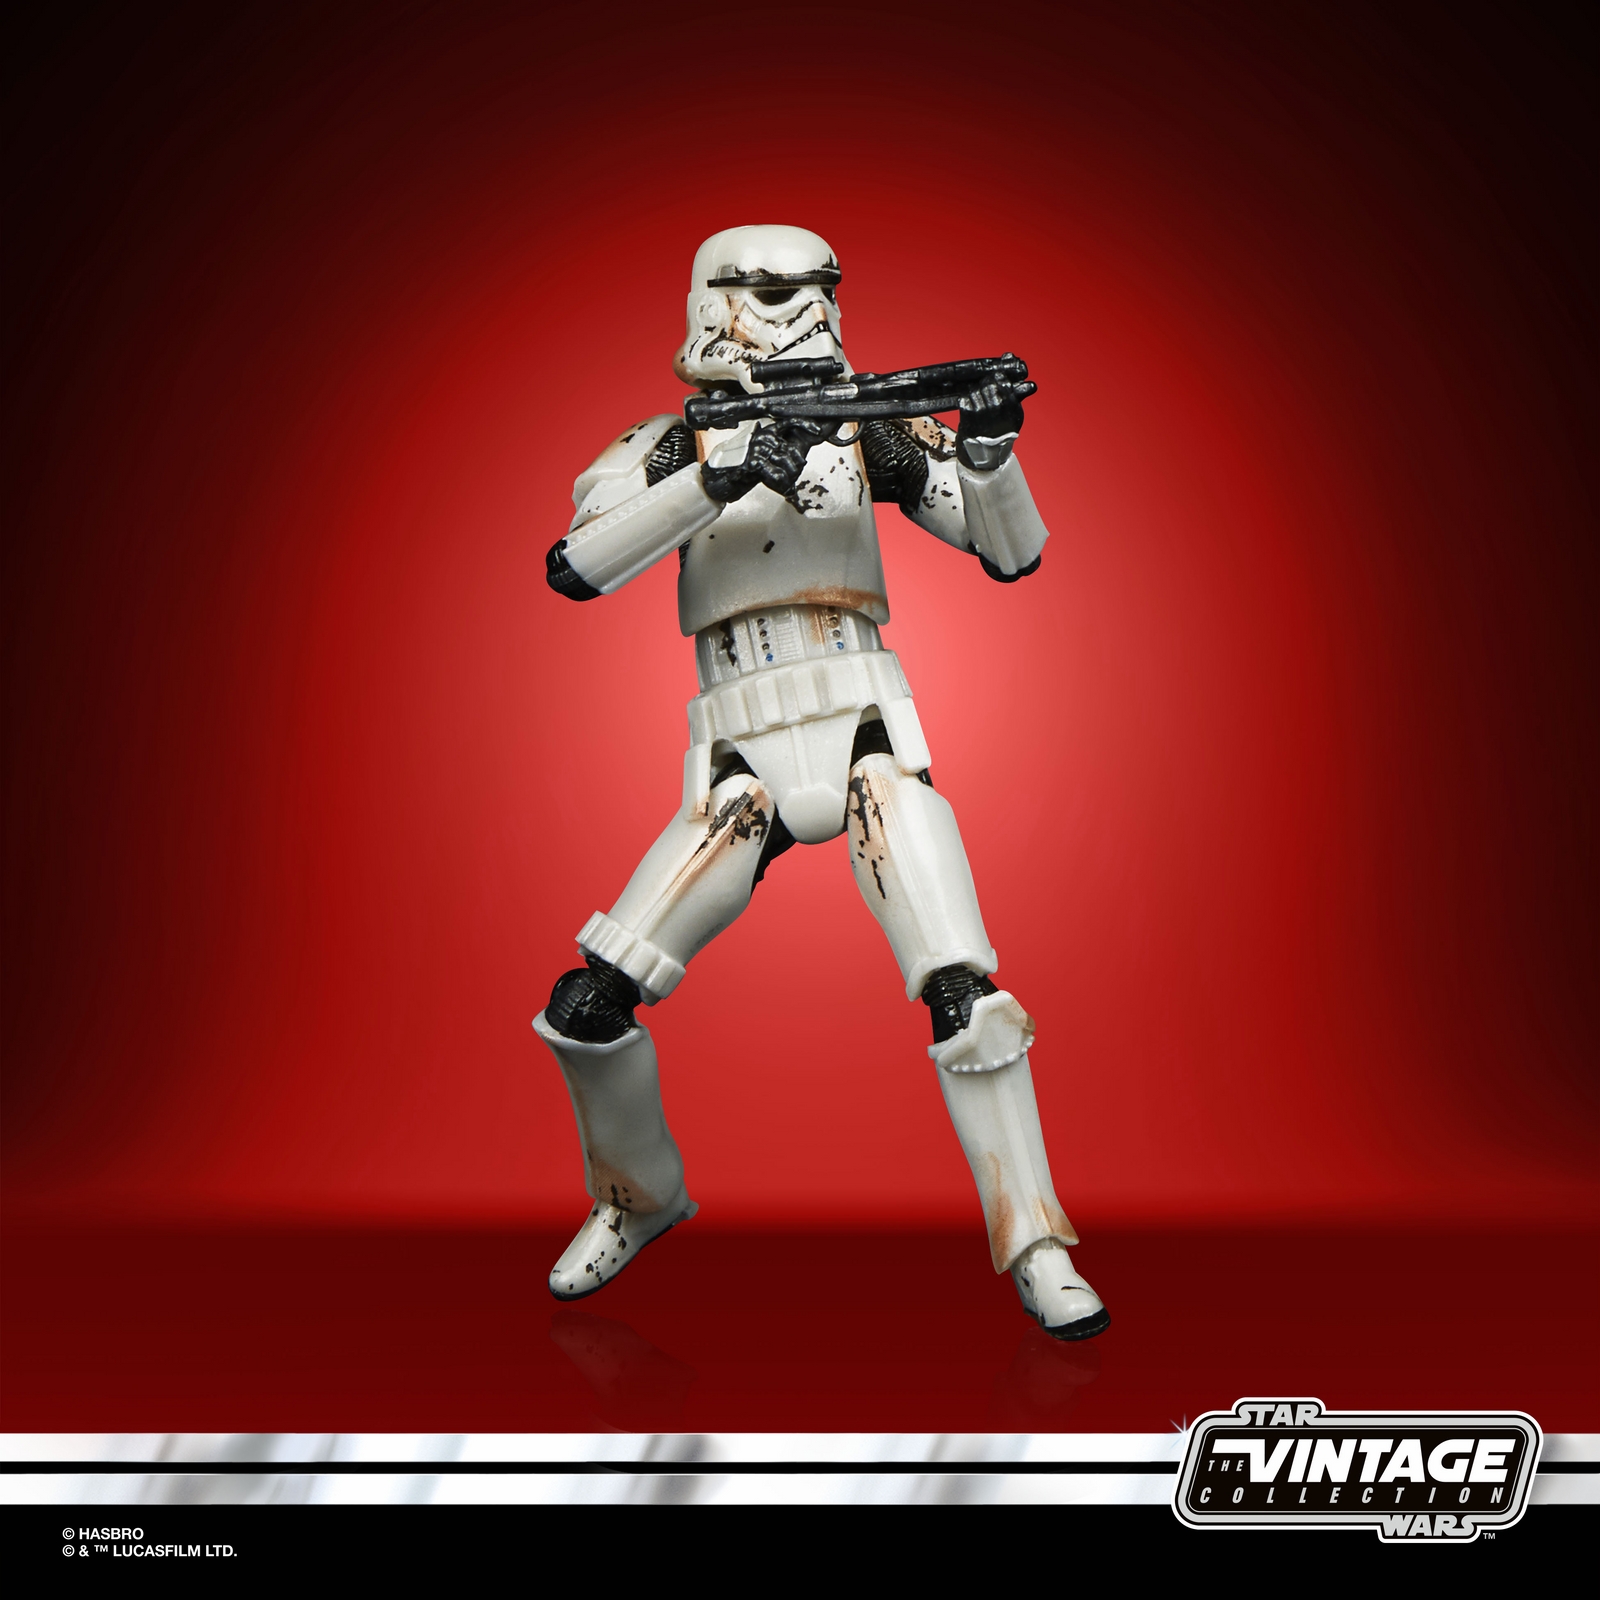 STAR WARS THE VINTAGE COLLECTION CARBONIZED COLLECTION 3.75-INCH REMNANT TROOPER - oop.jpg